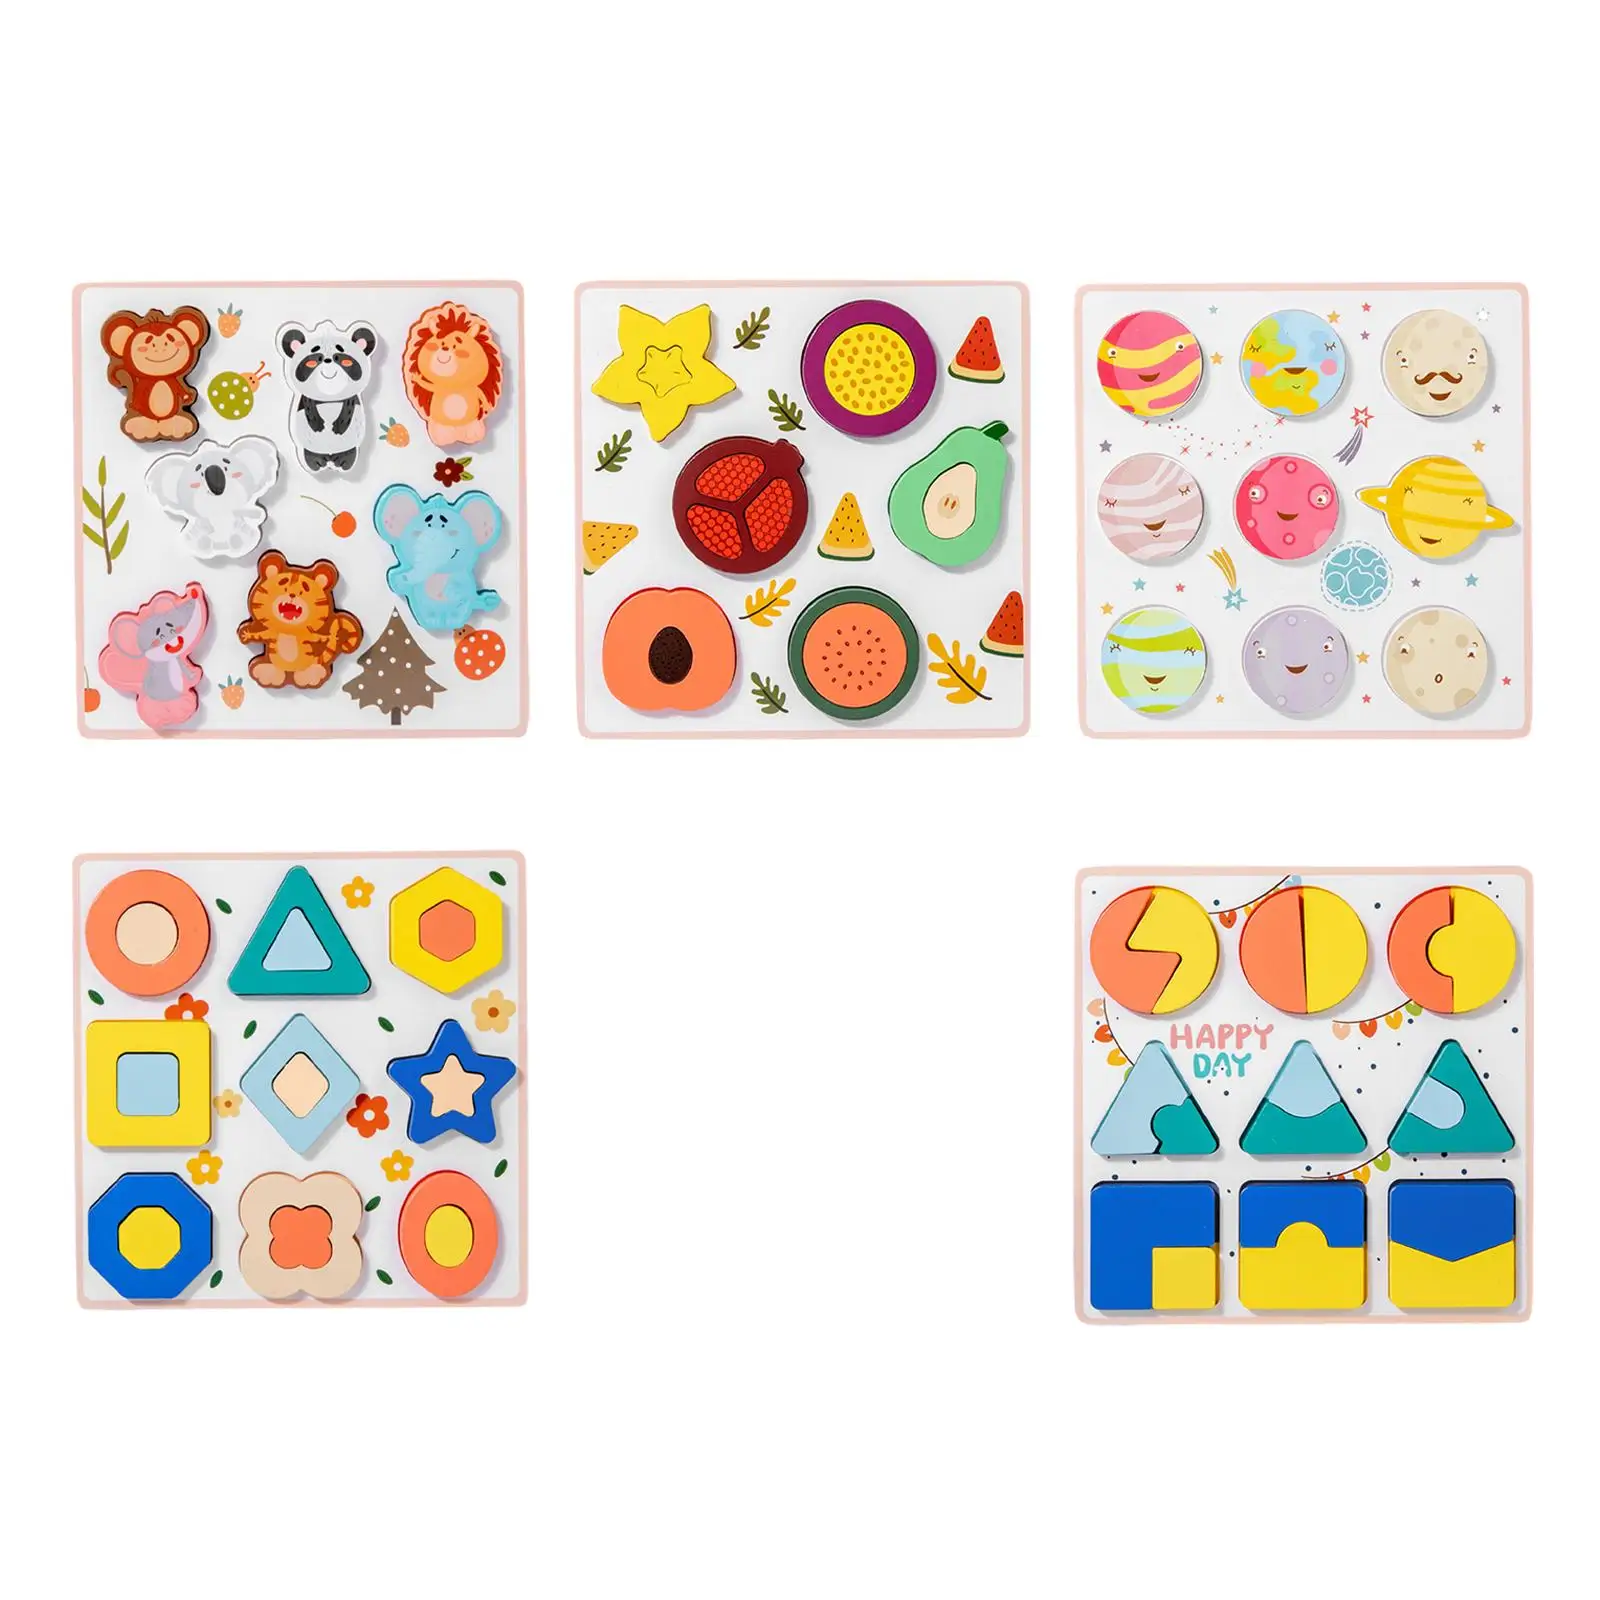 

Wooden Jigsaw Puzzles Preschool Learning Activities Development Toy for Toddlers 1 2 3 Year Old Kids Girls Boys Birthday Gift